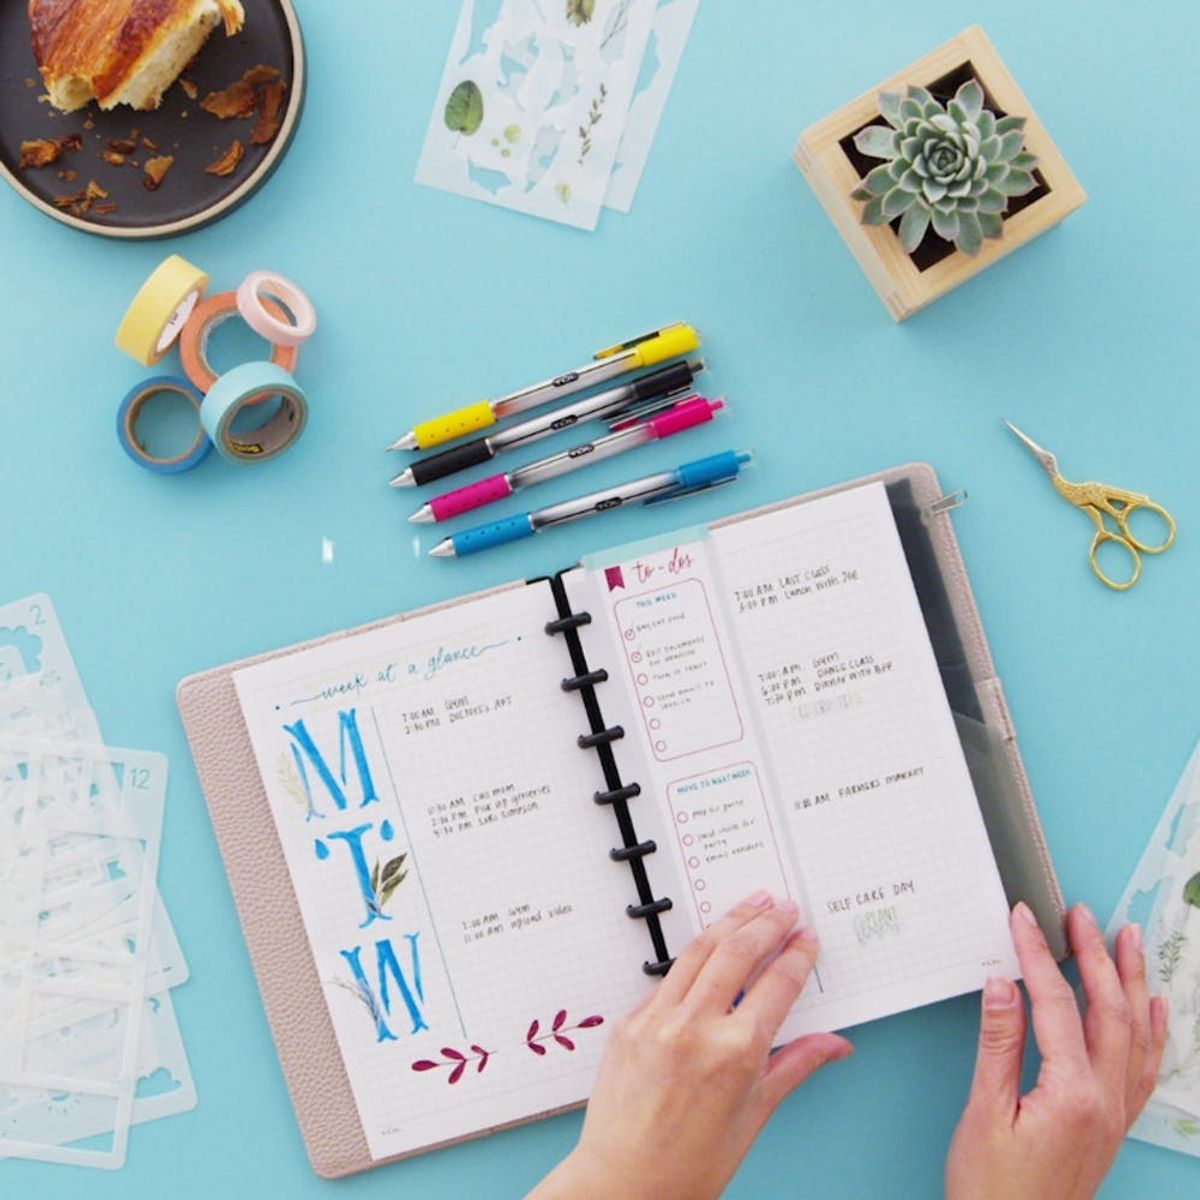 Check Out This Simple Cheat Sheet to Bullet Journaling Like a Boss